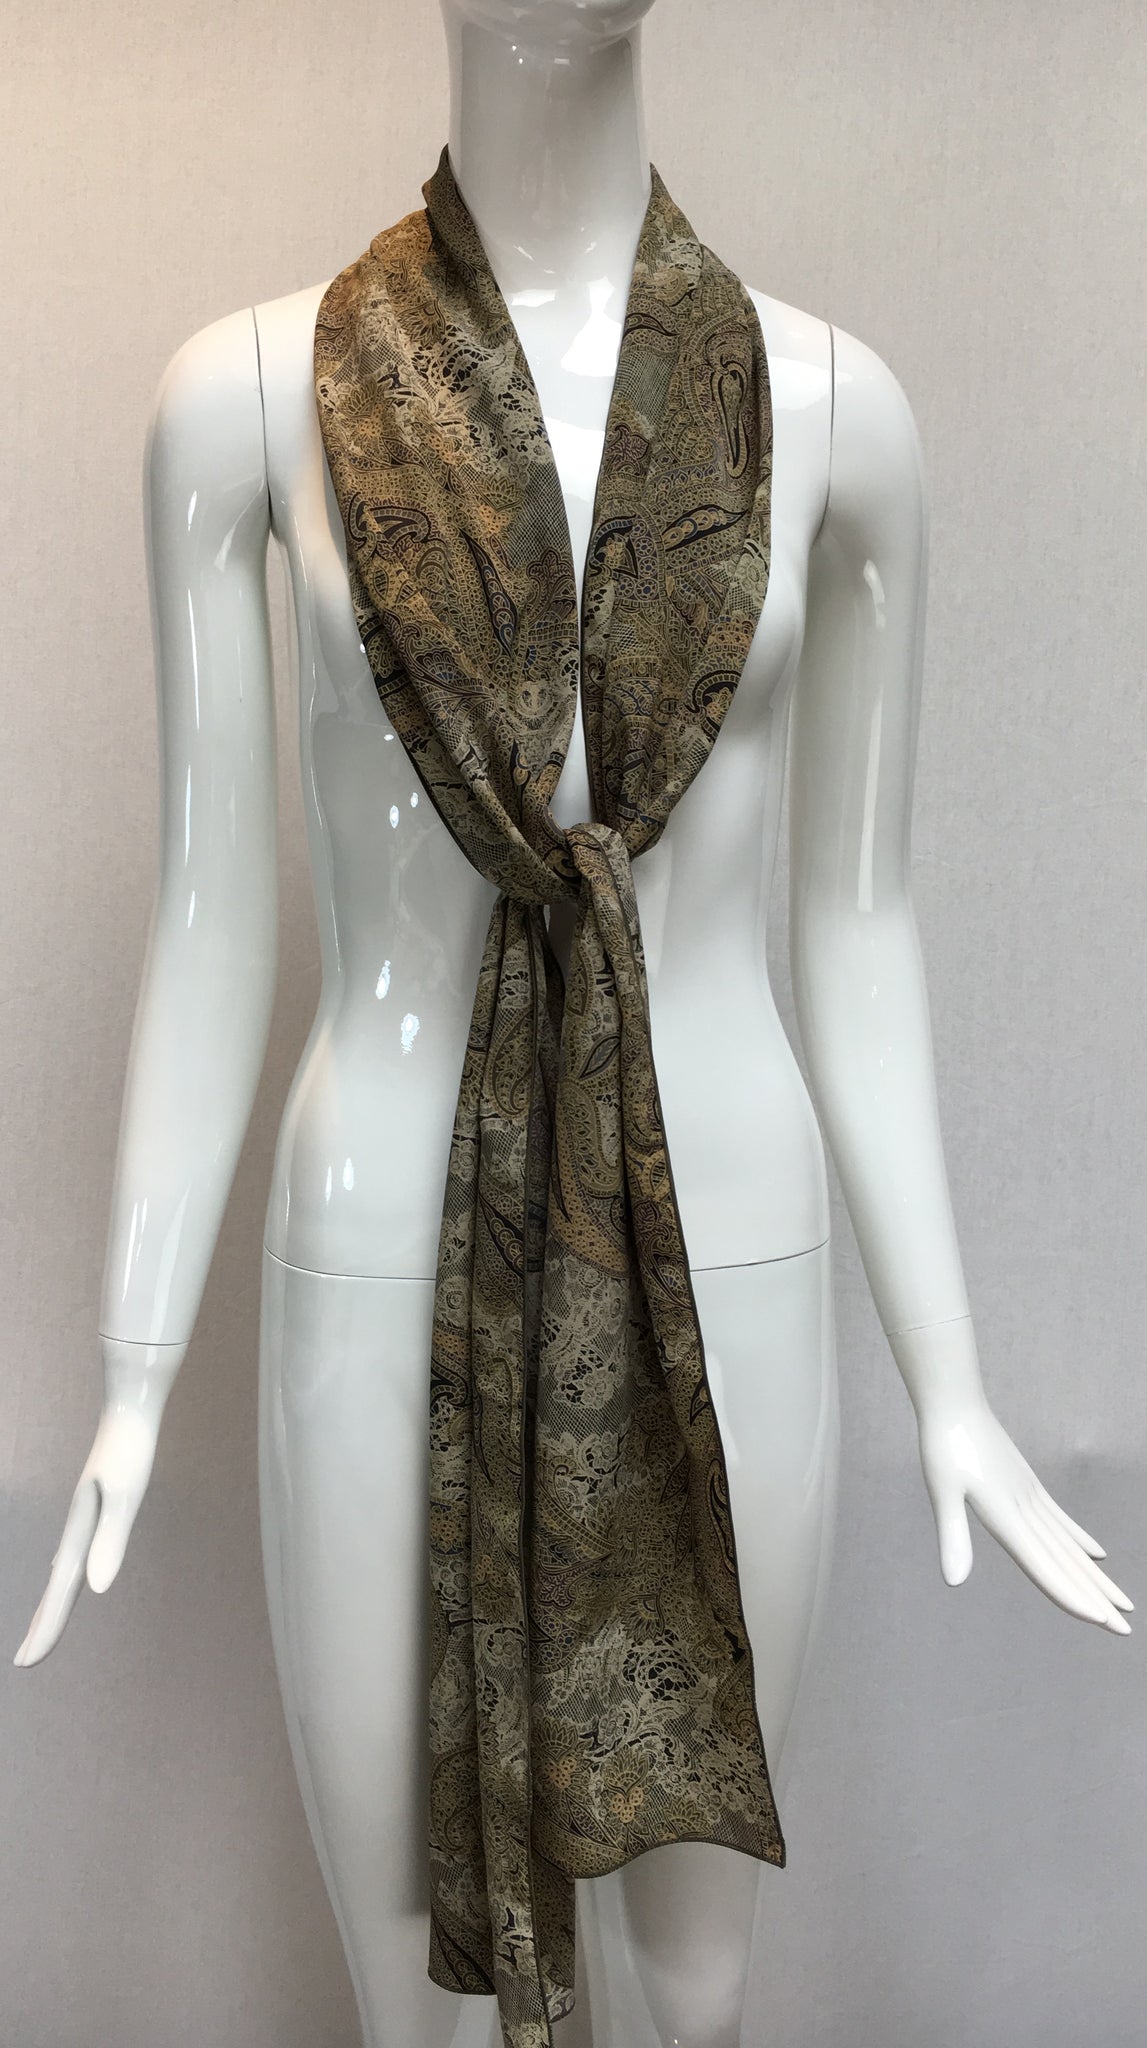 Deleuse Silk Scarf, SOLD OUT